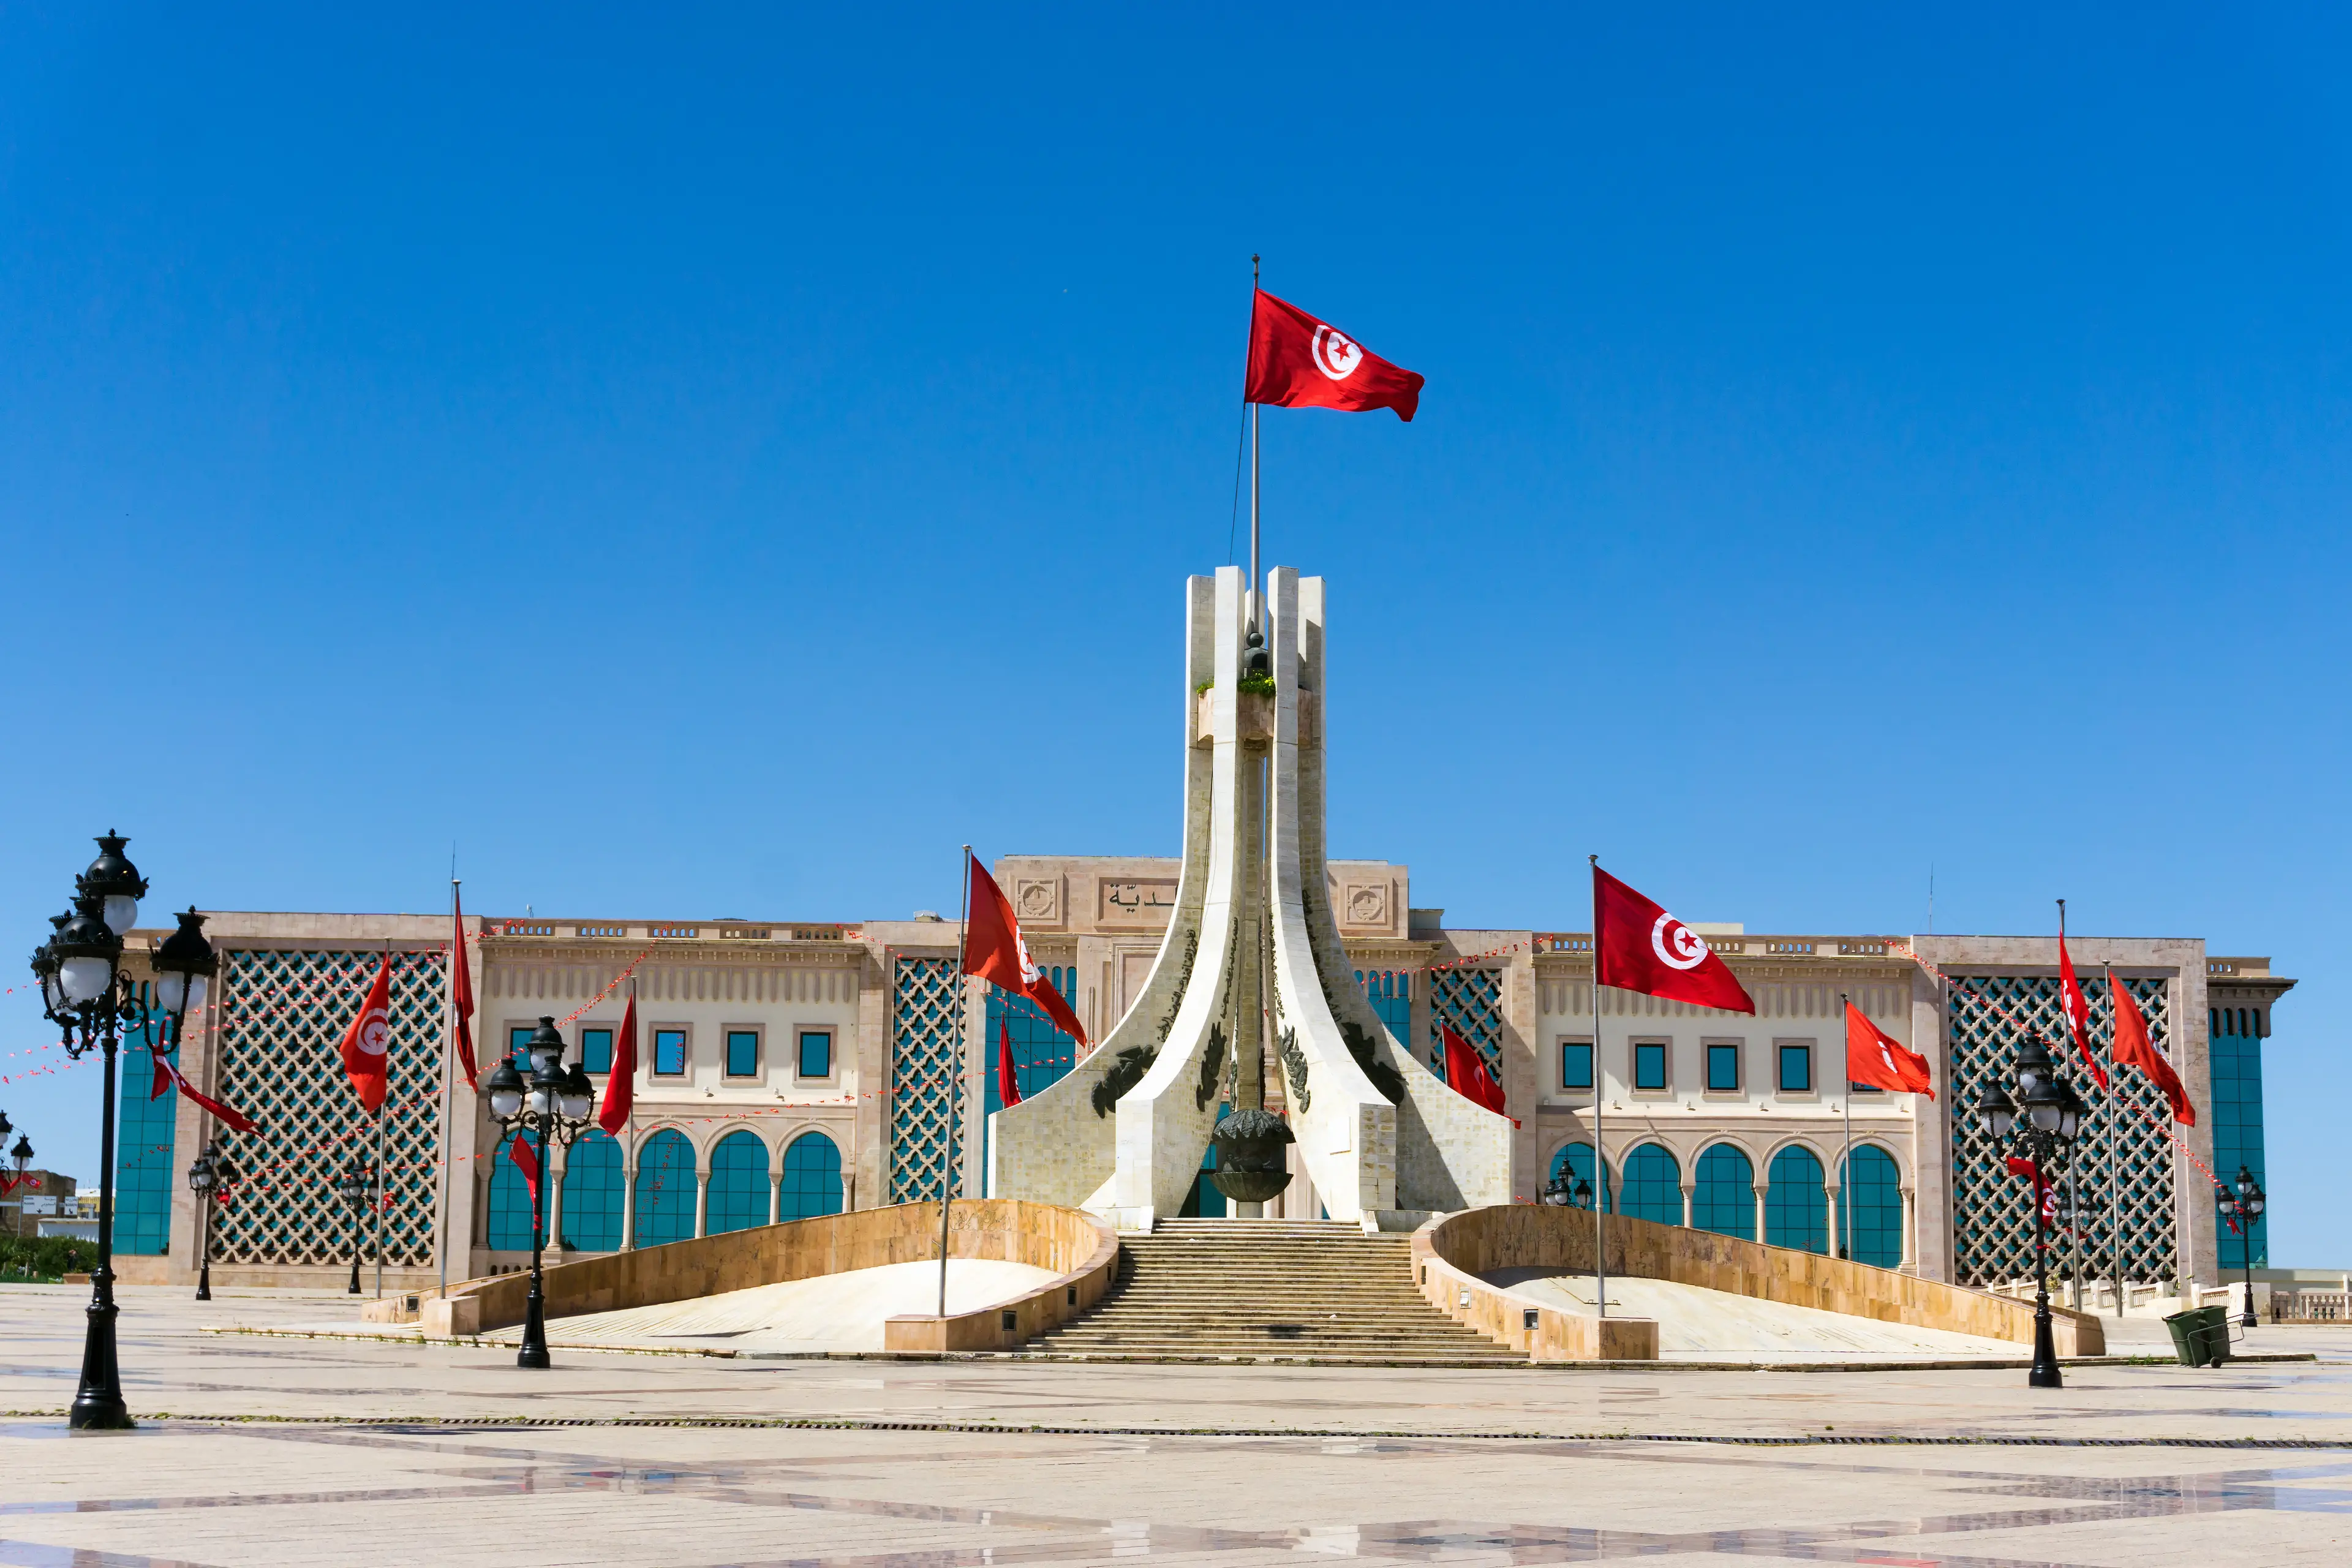 City hall and the monument of the Kasbah square